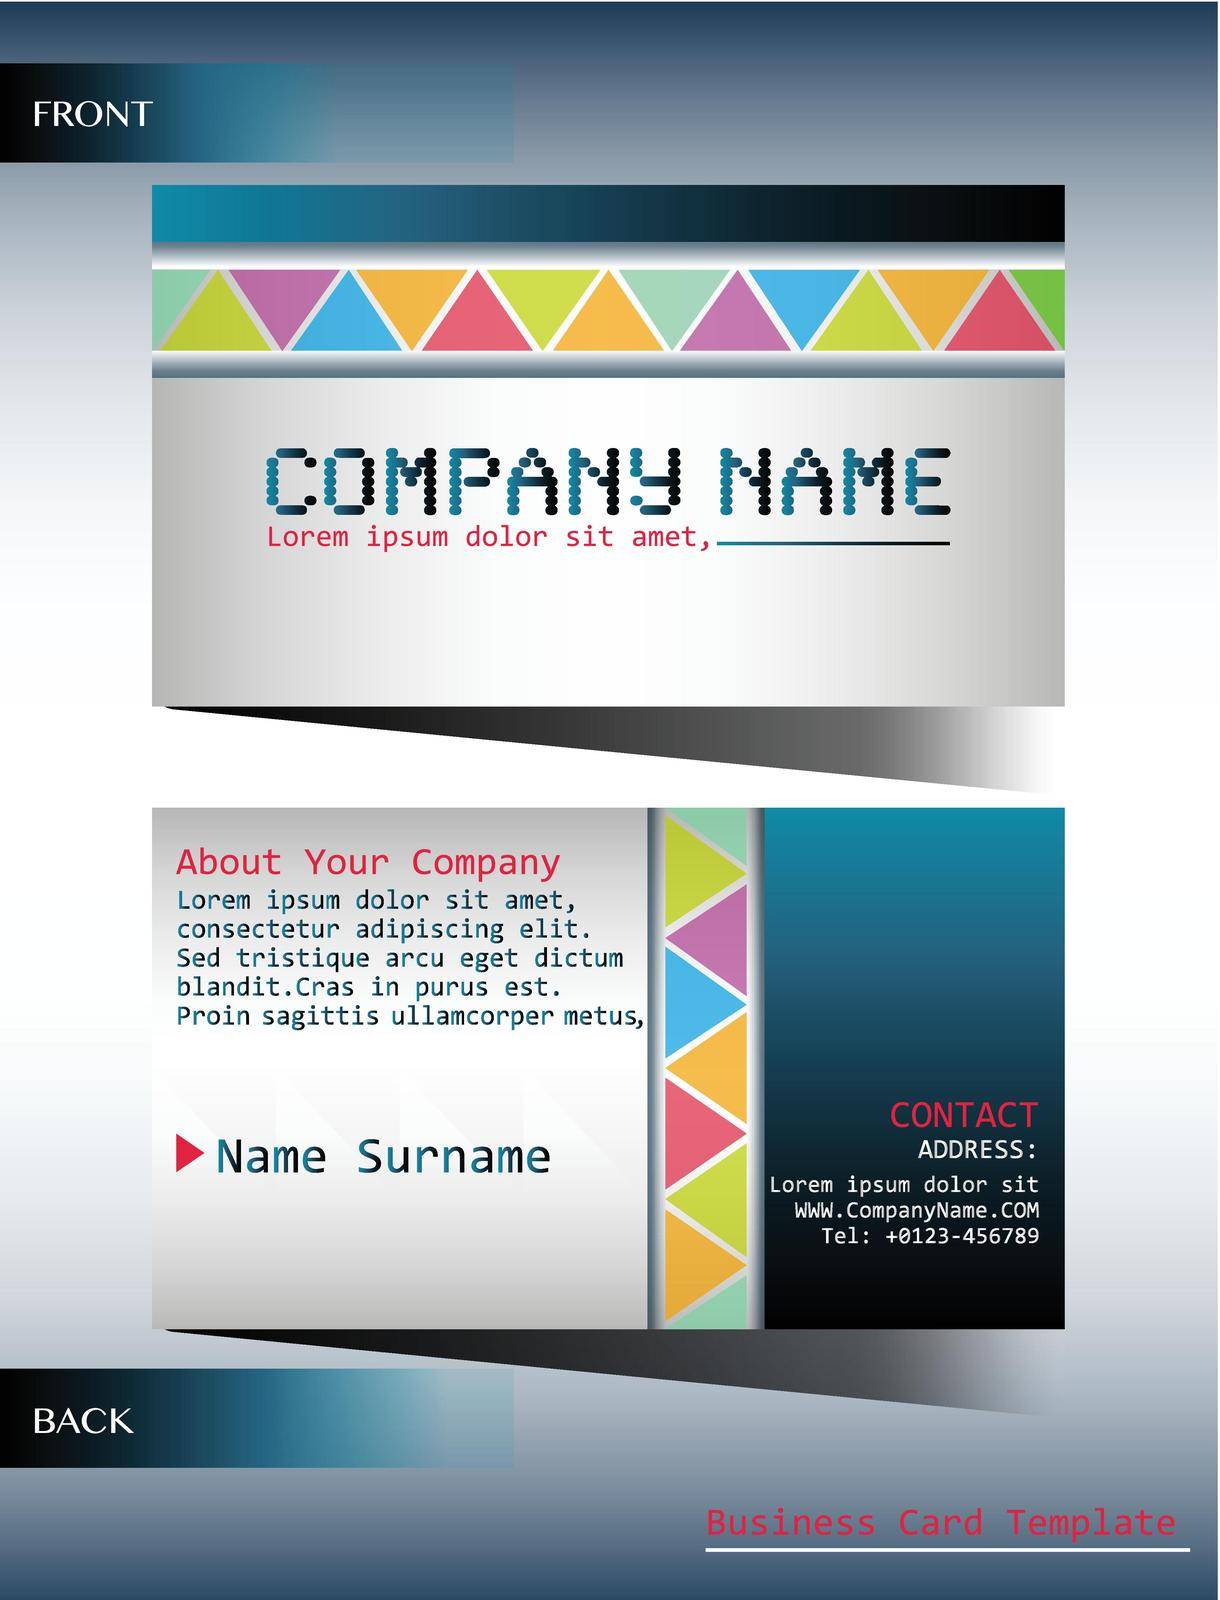 Template of business card both front and back view